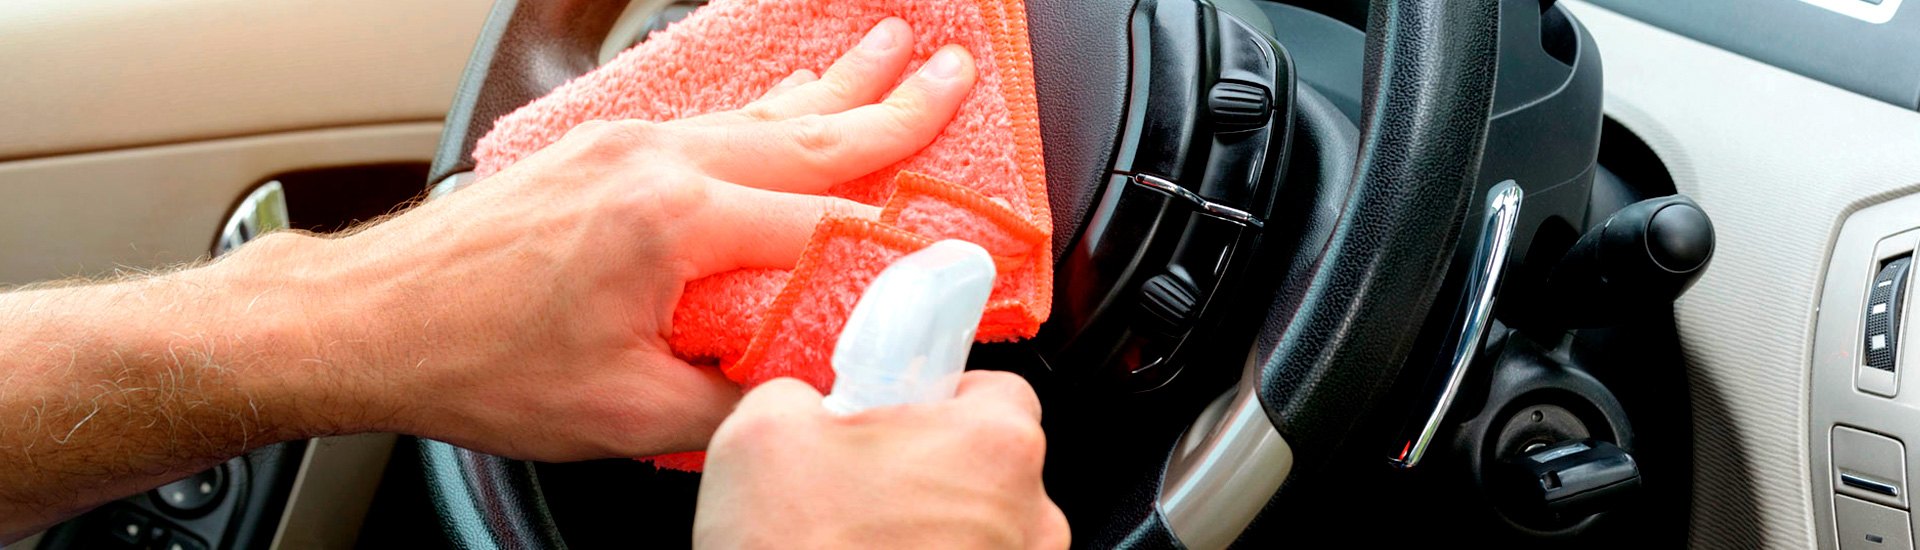 Keeping Cars Germ-Free While Preserving Surfaces